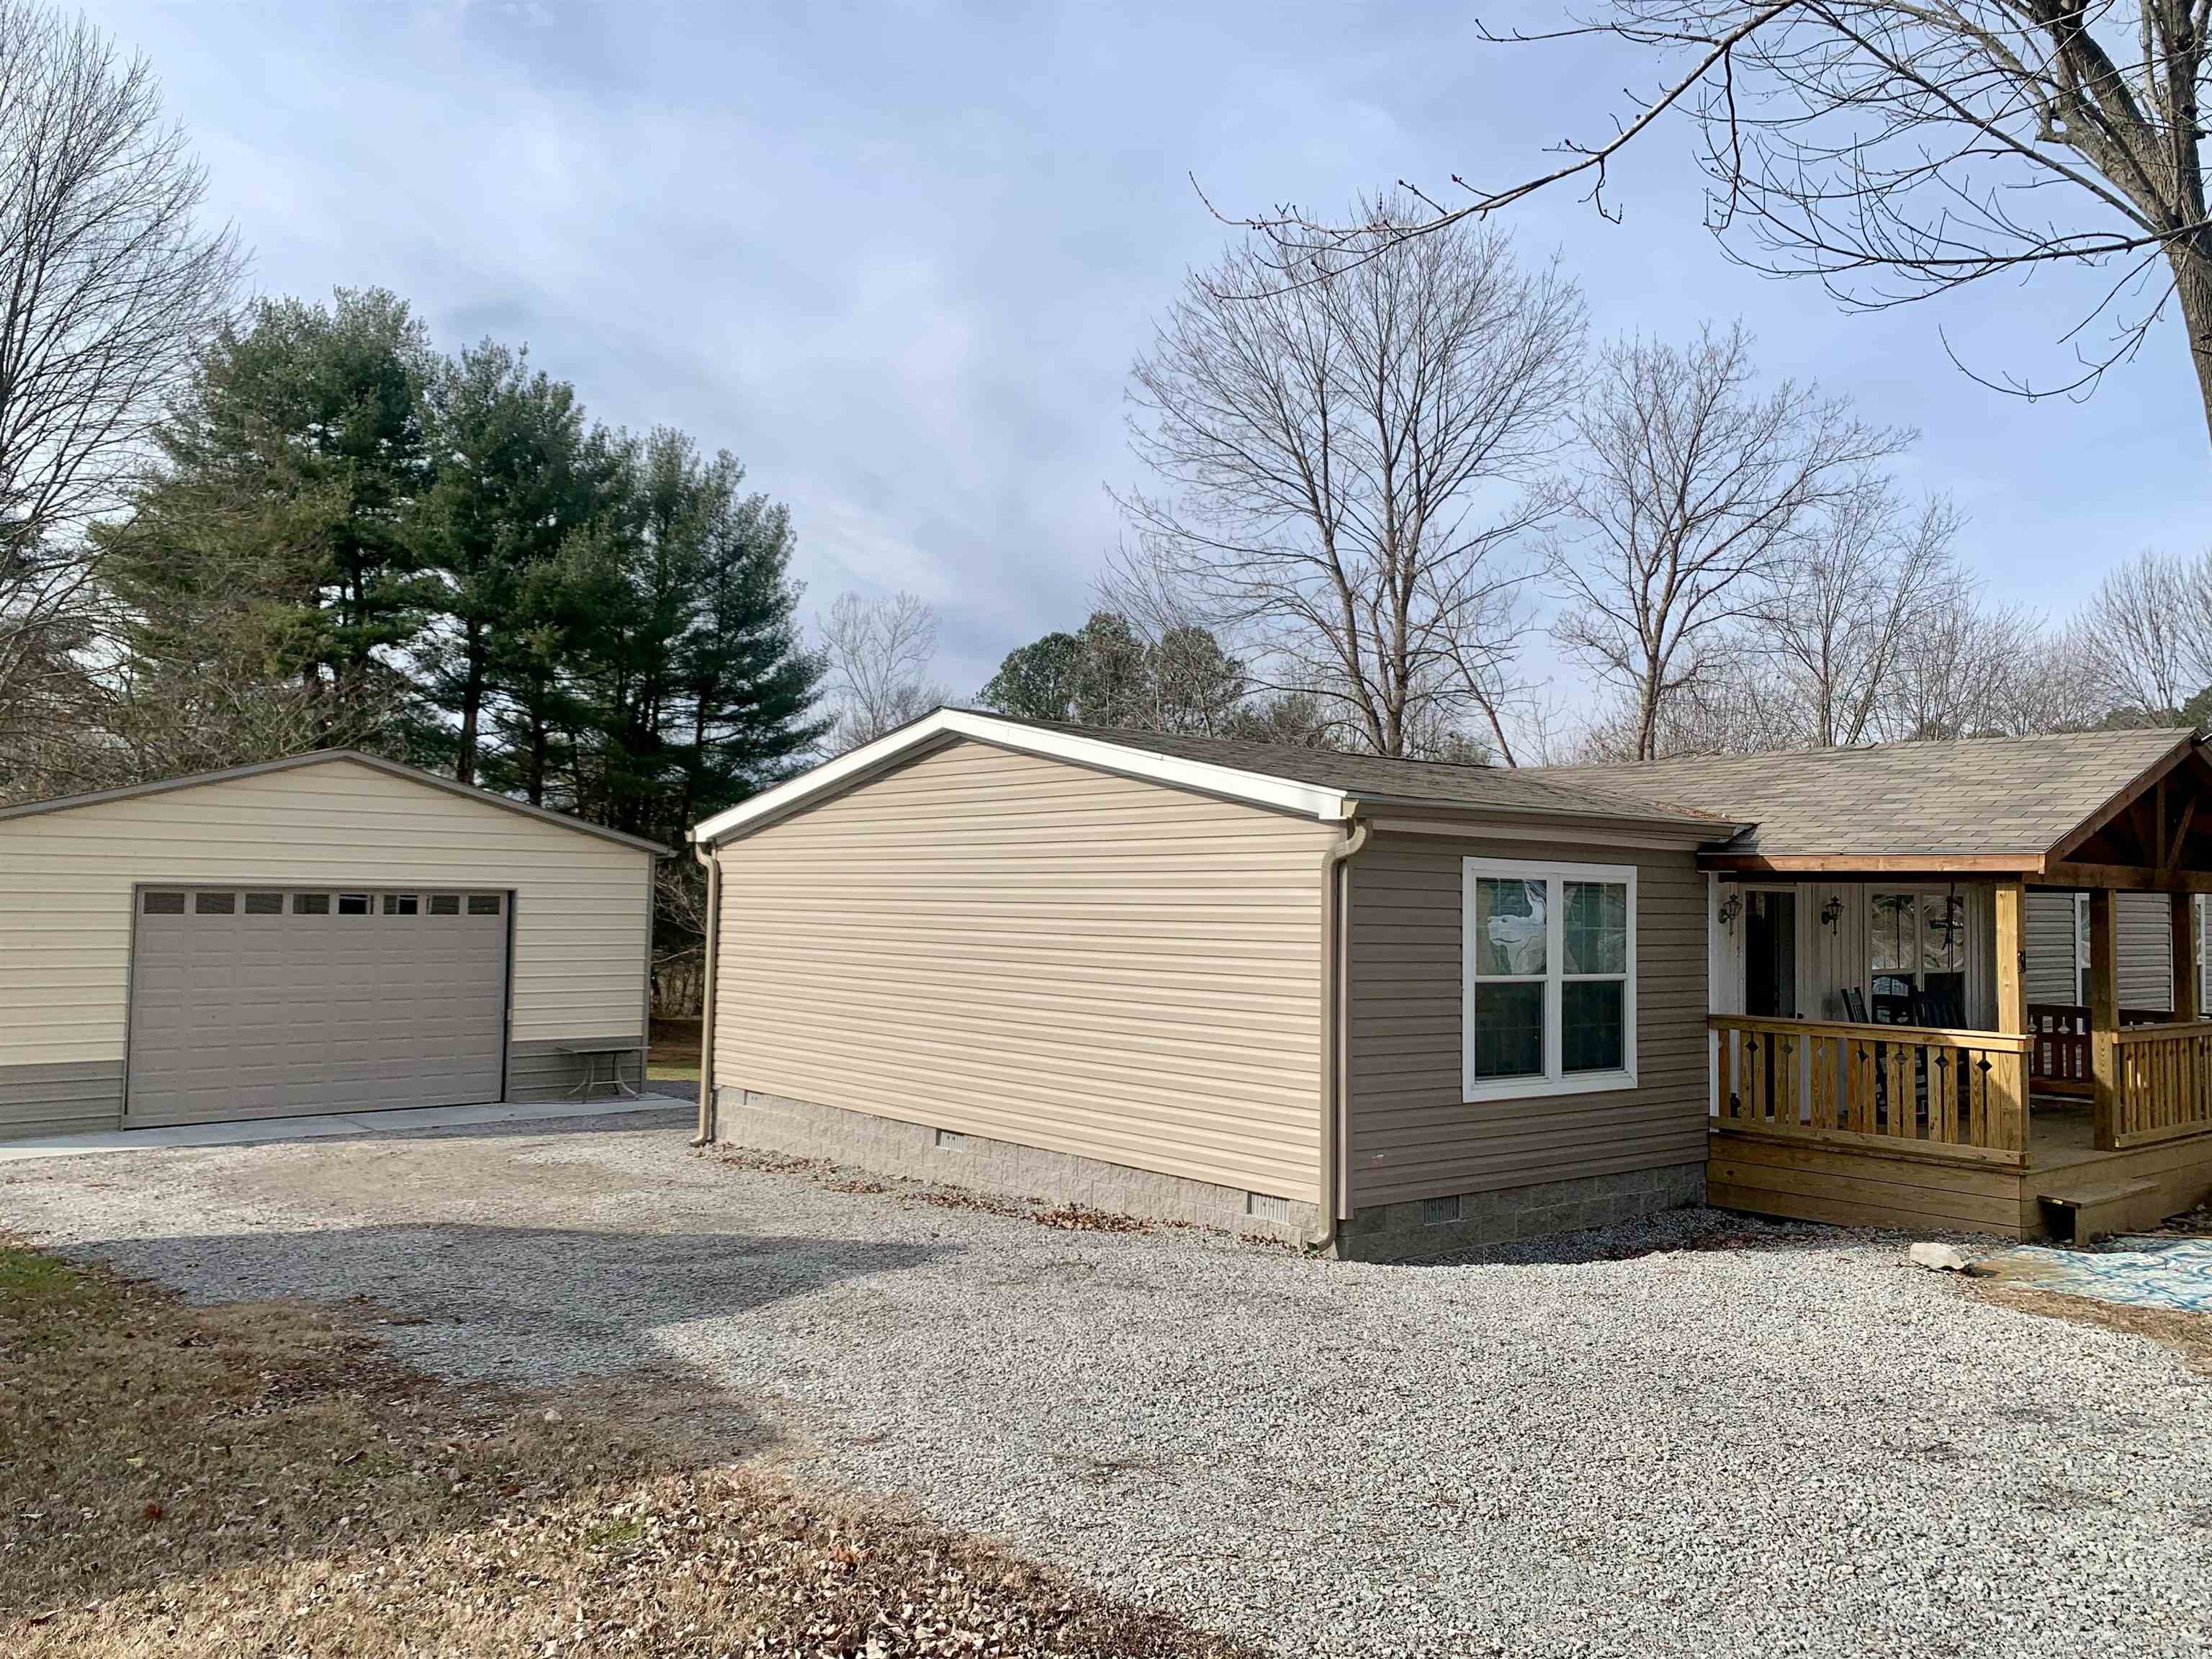 31 Friendship Rd, Falls of Rough, Kentucky 40119, 3 Bedrooms Bedrooms, ,2 BathroomsBathrooms,Manufactured Home,For Sale,Friendship Rd,88716